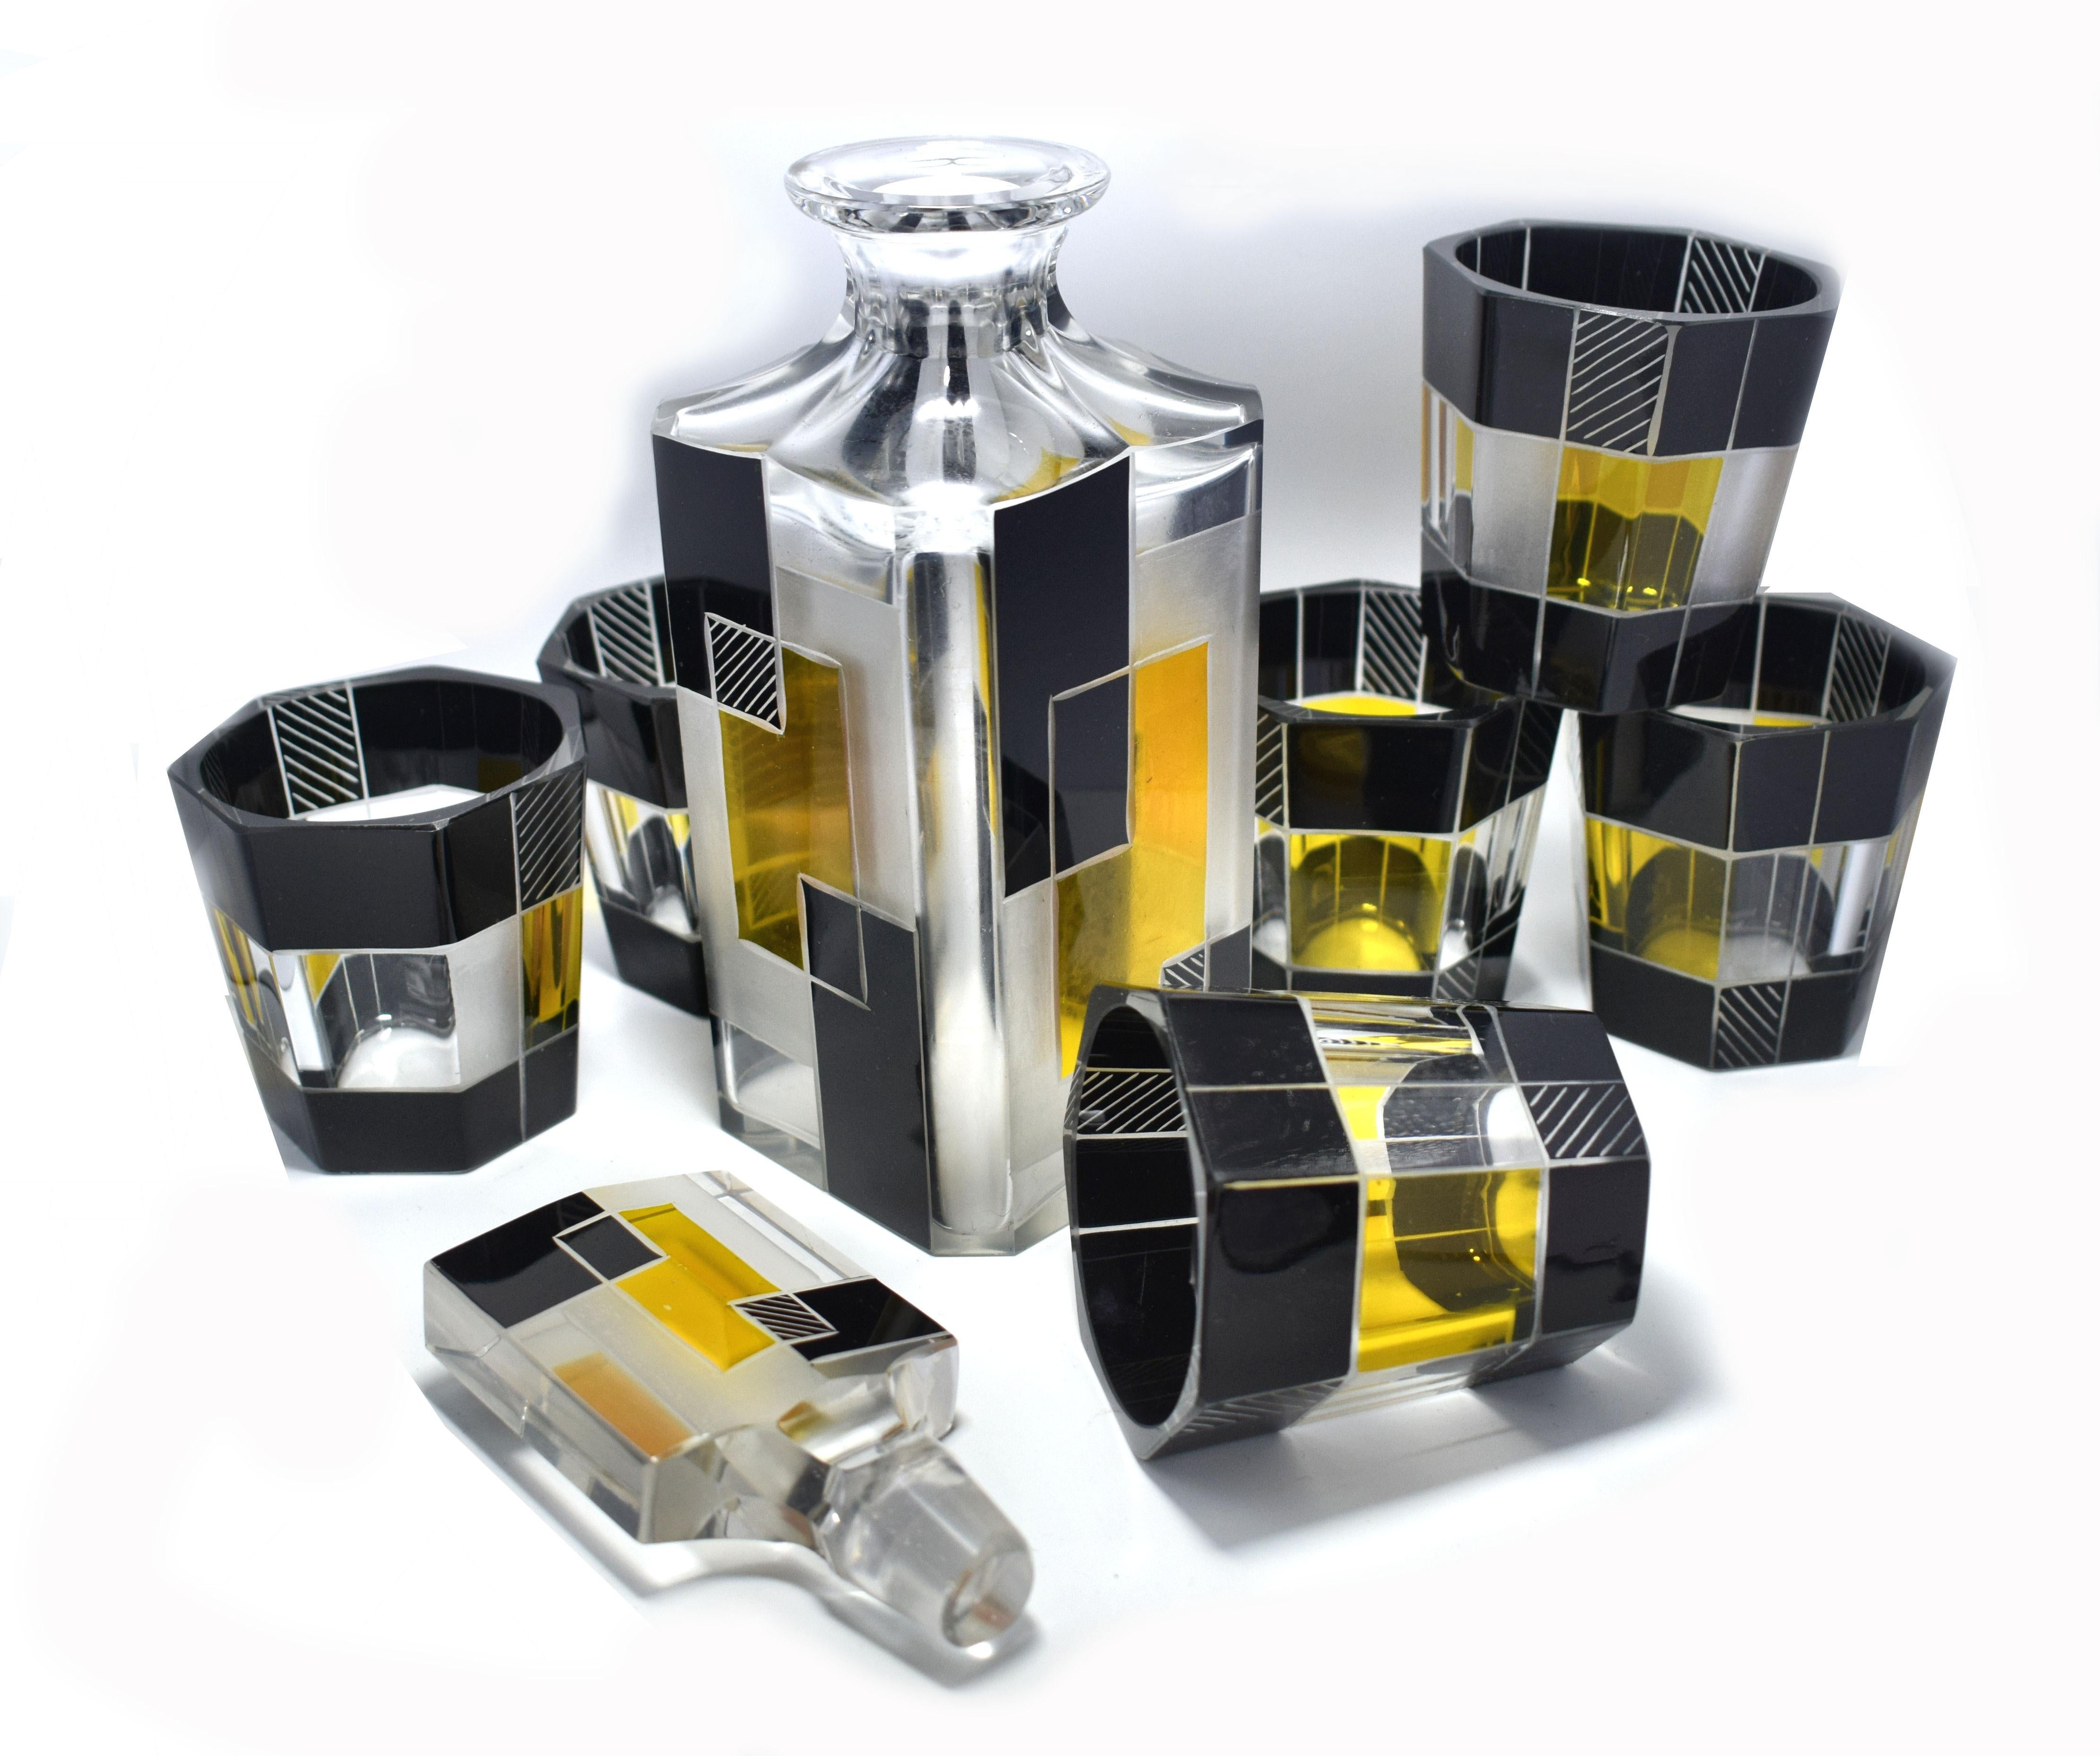 Very high quality, very striking looking 1930s Art Deco Czech glass decanter set. Features a Classic shape decanter with stopped and six decent sized glass tumblers . The whole set is enameled in yellow and black with etching to highlight the